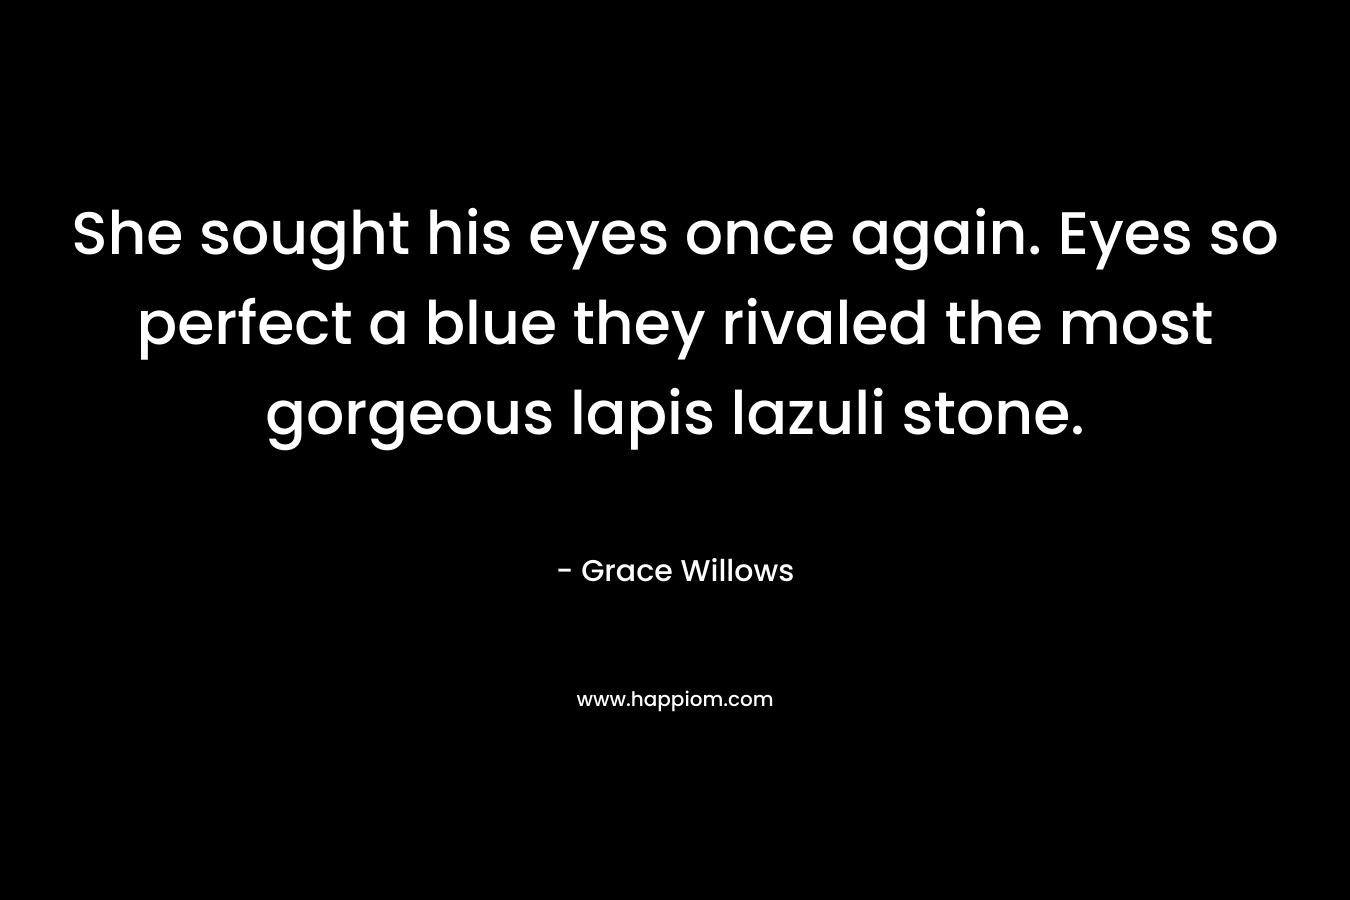 She sought his eyes once again. Eyes so perfect a blue they rivaled the most gorgeous lapis lazuli stone.